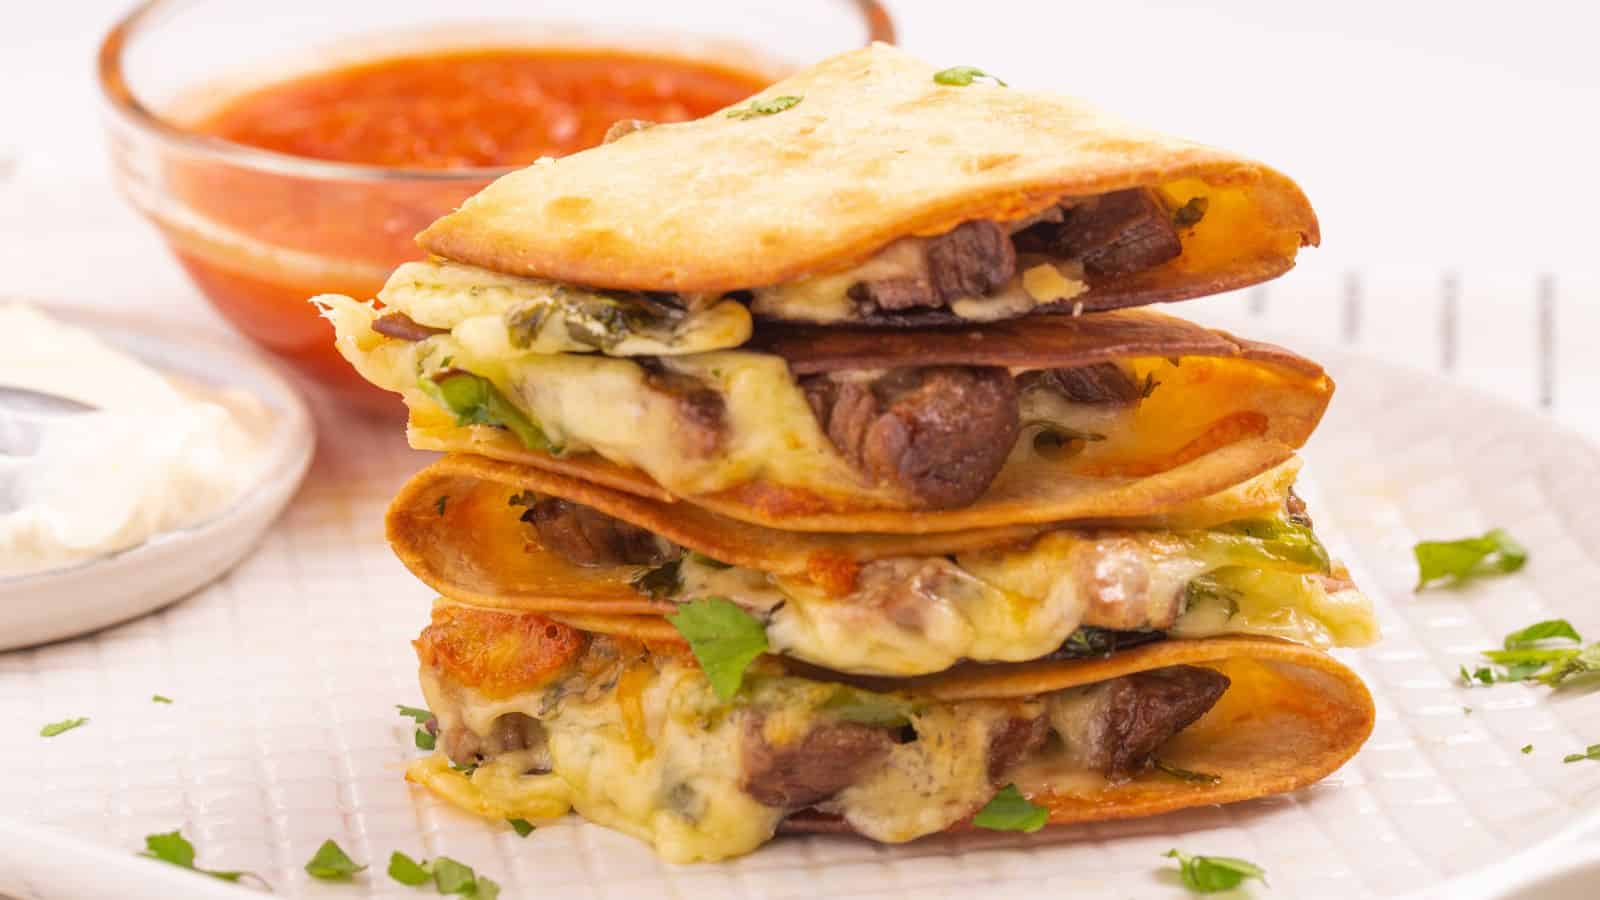 A stack of quesadillas filled with cheese and steak served with a side of red salsa on a white plate.